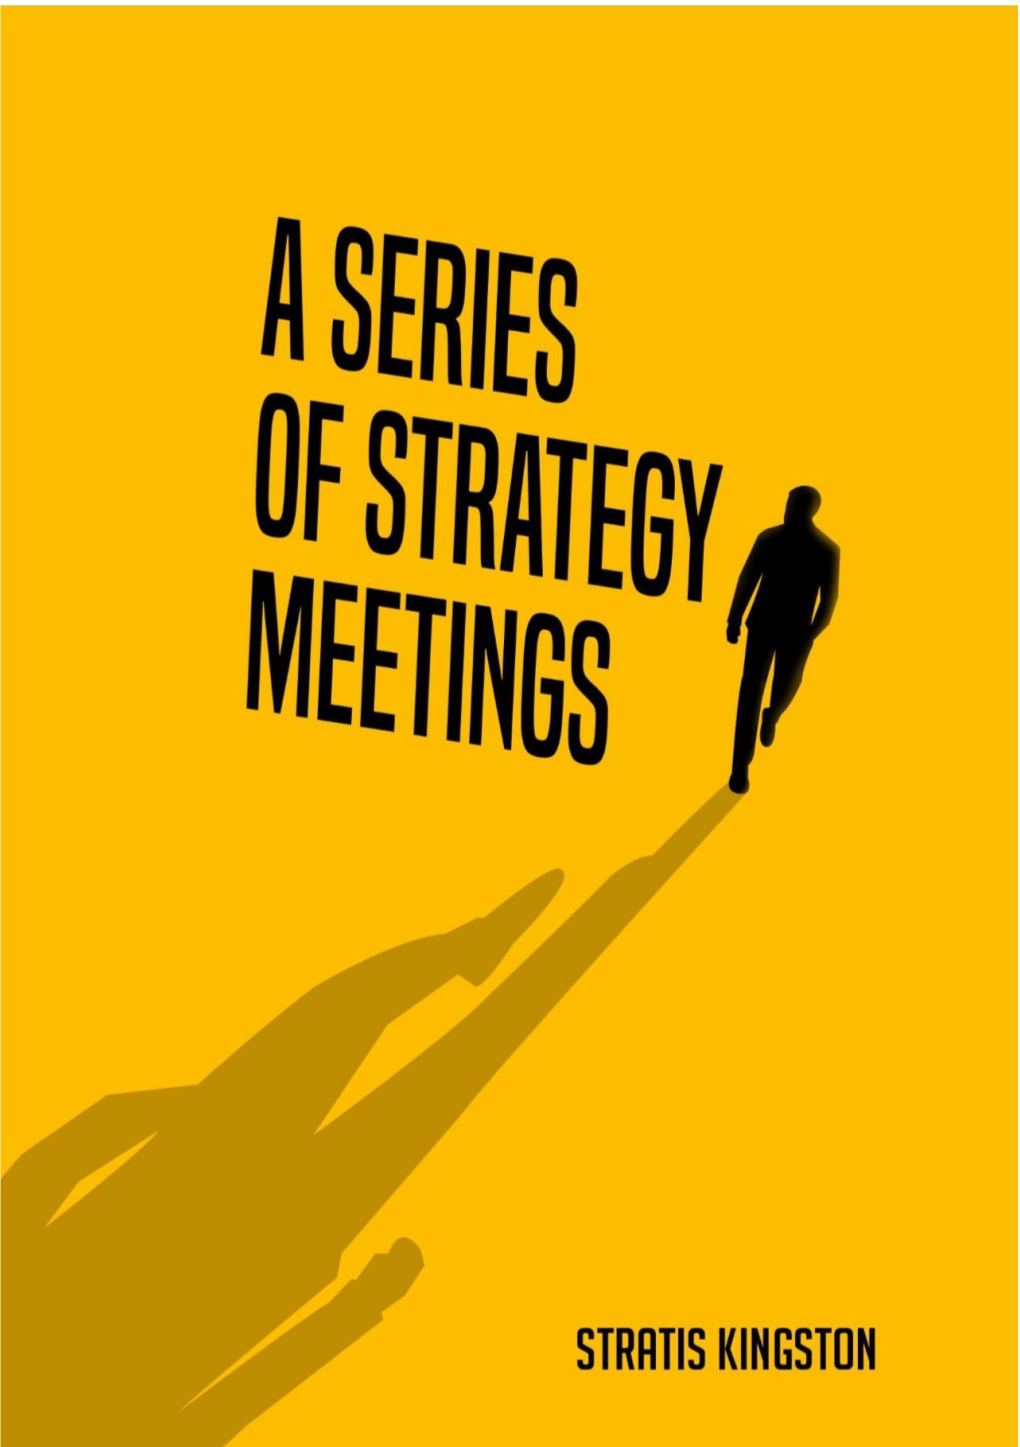 A Series of Strategy Meetings